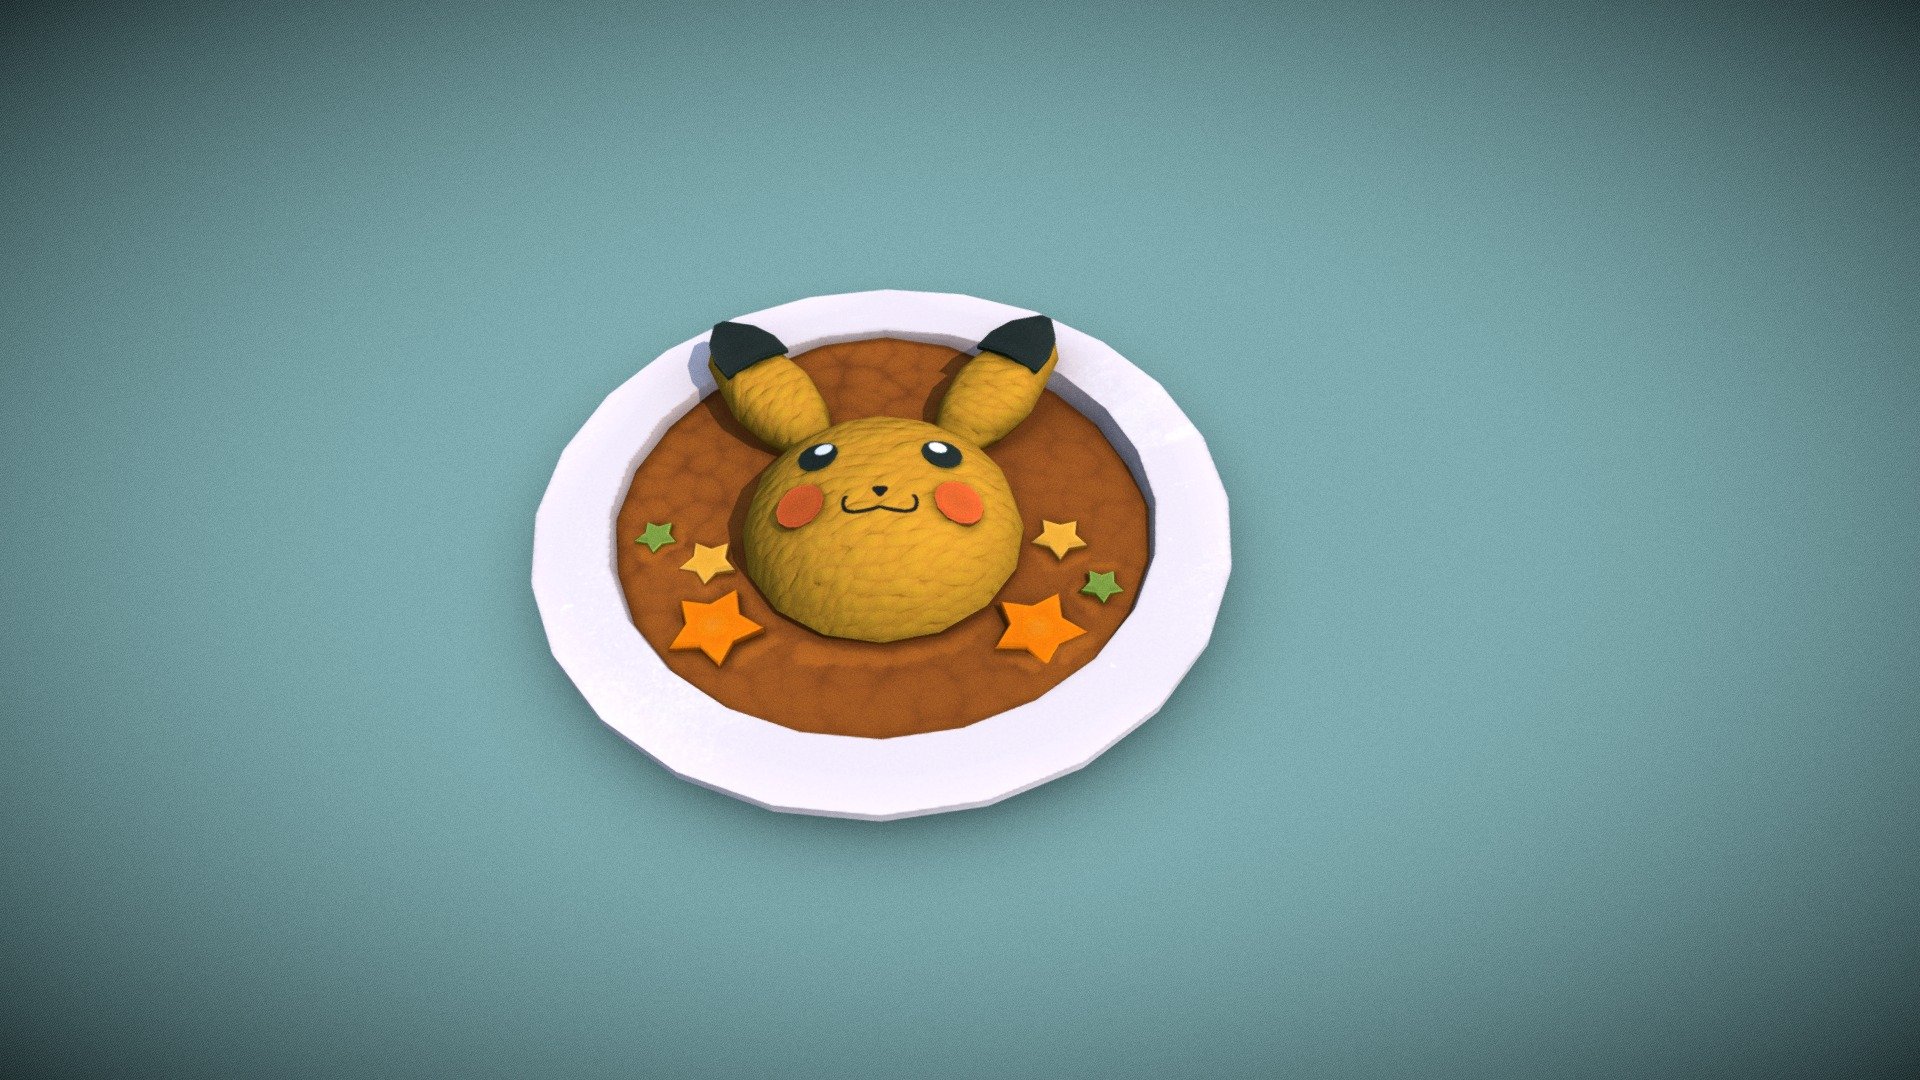 I decided to model the Piquant Pikachu Curry as part of a series of Pokémon Café Mix models. The rice and the curry materials are the firsts ones I made on Substance Designer ever, and I quite like the result 3d model